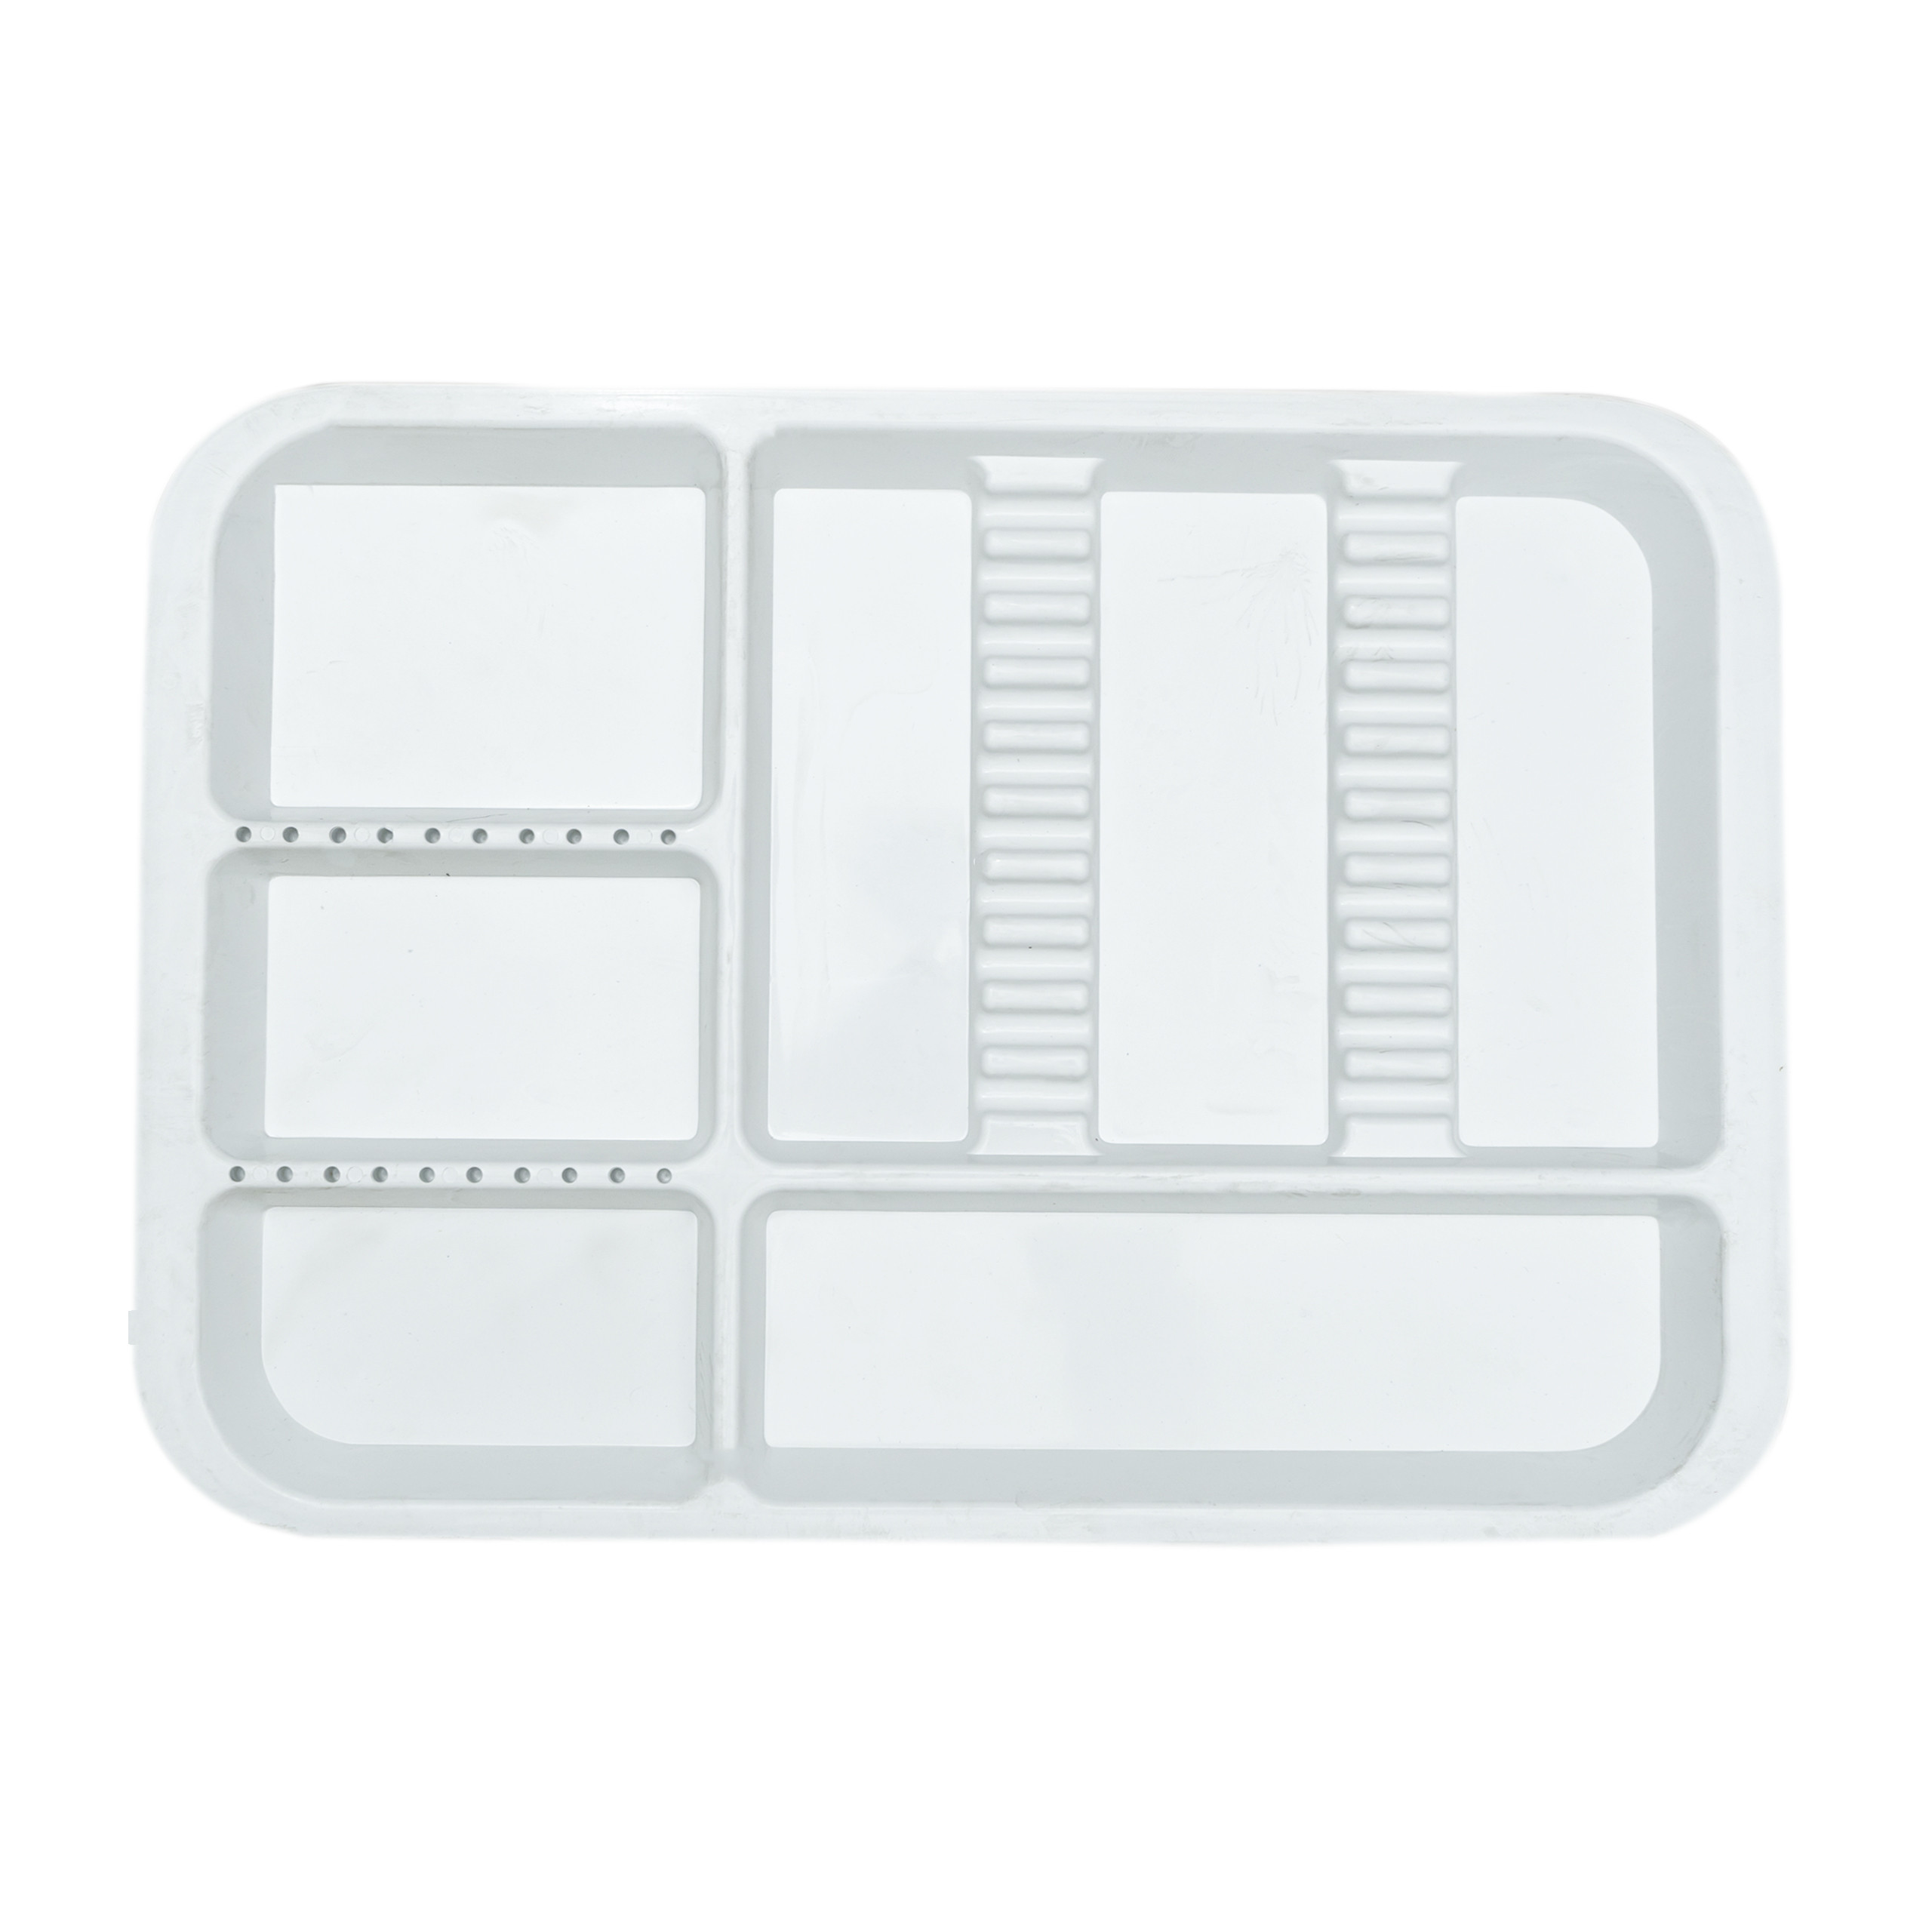 Instrument Tray Large (Pack of 5)